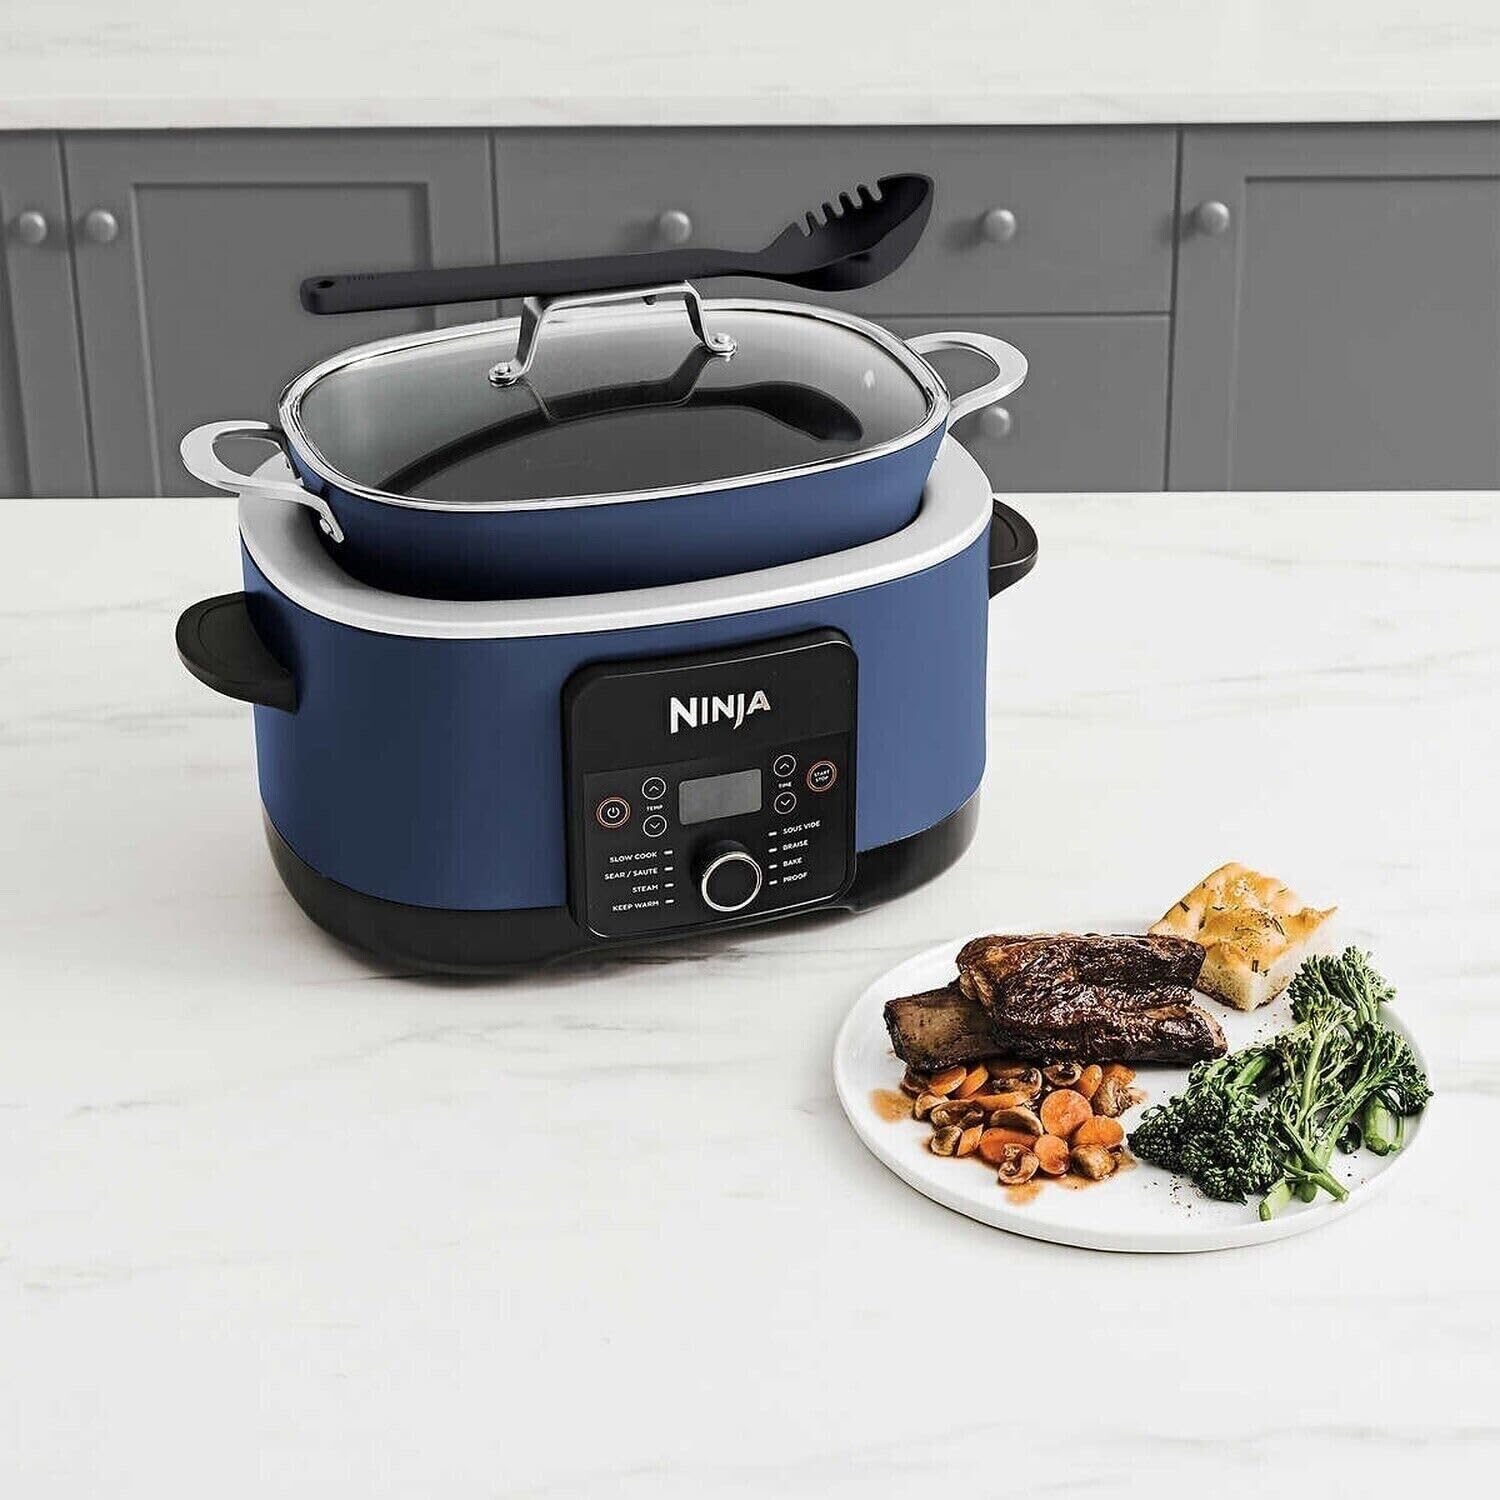 Ninja Foodi PossibleCooker PRO 8.5 Quart Multi-Cooker, with 8-in-1 Slow Cooker, Dutch Oven, Steamer  More, Glass Lid  Integrated Spoon, Nonstick, Oven Safe Pot to 500°F, Navy (Blue)